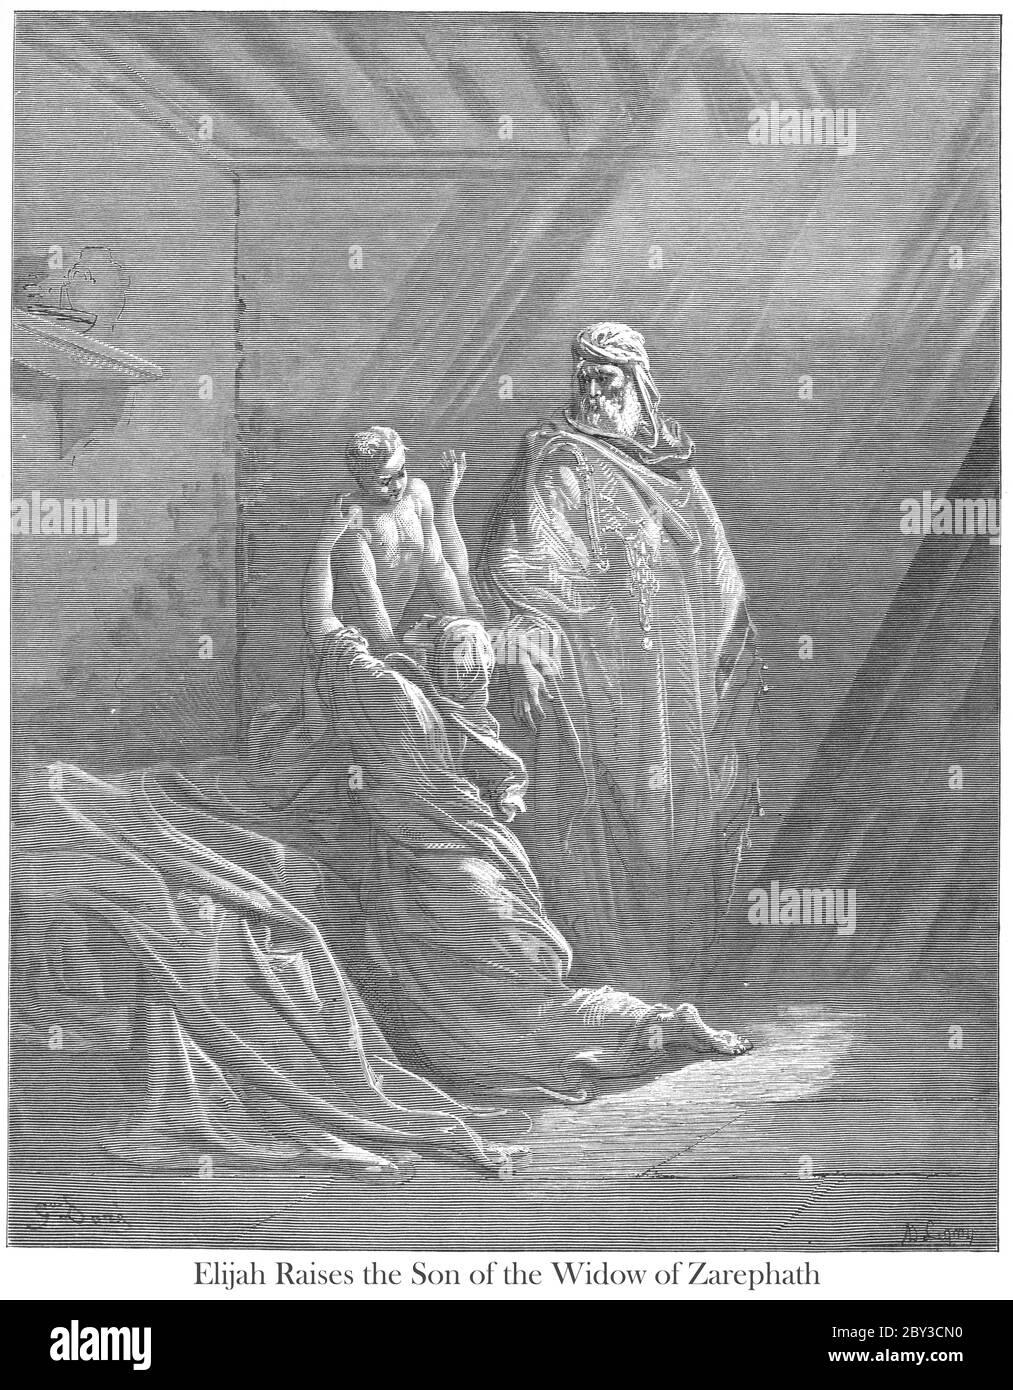 Elijah Raises the Son of the Widow of Zarephath 1 Kings 17:22-23 From the book 'Bible Gallery' Illustrated by Gustave Dore with Memoir of Dore and Descriptive Letter-press by Talbot W. Chambers D.D. Published by Cassell & Company Limited in London and simultaneously by Mame in Tours, France in 1866 Stock Photo